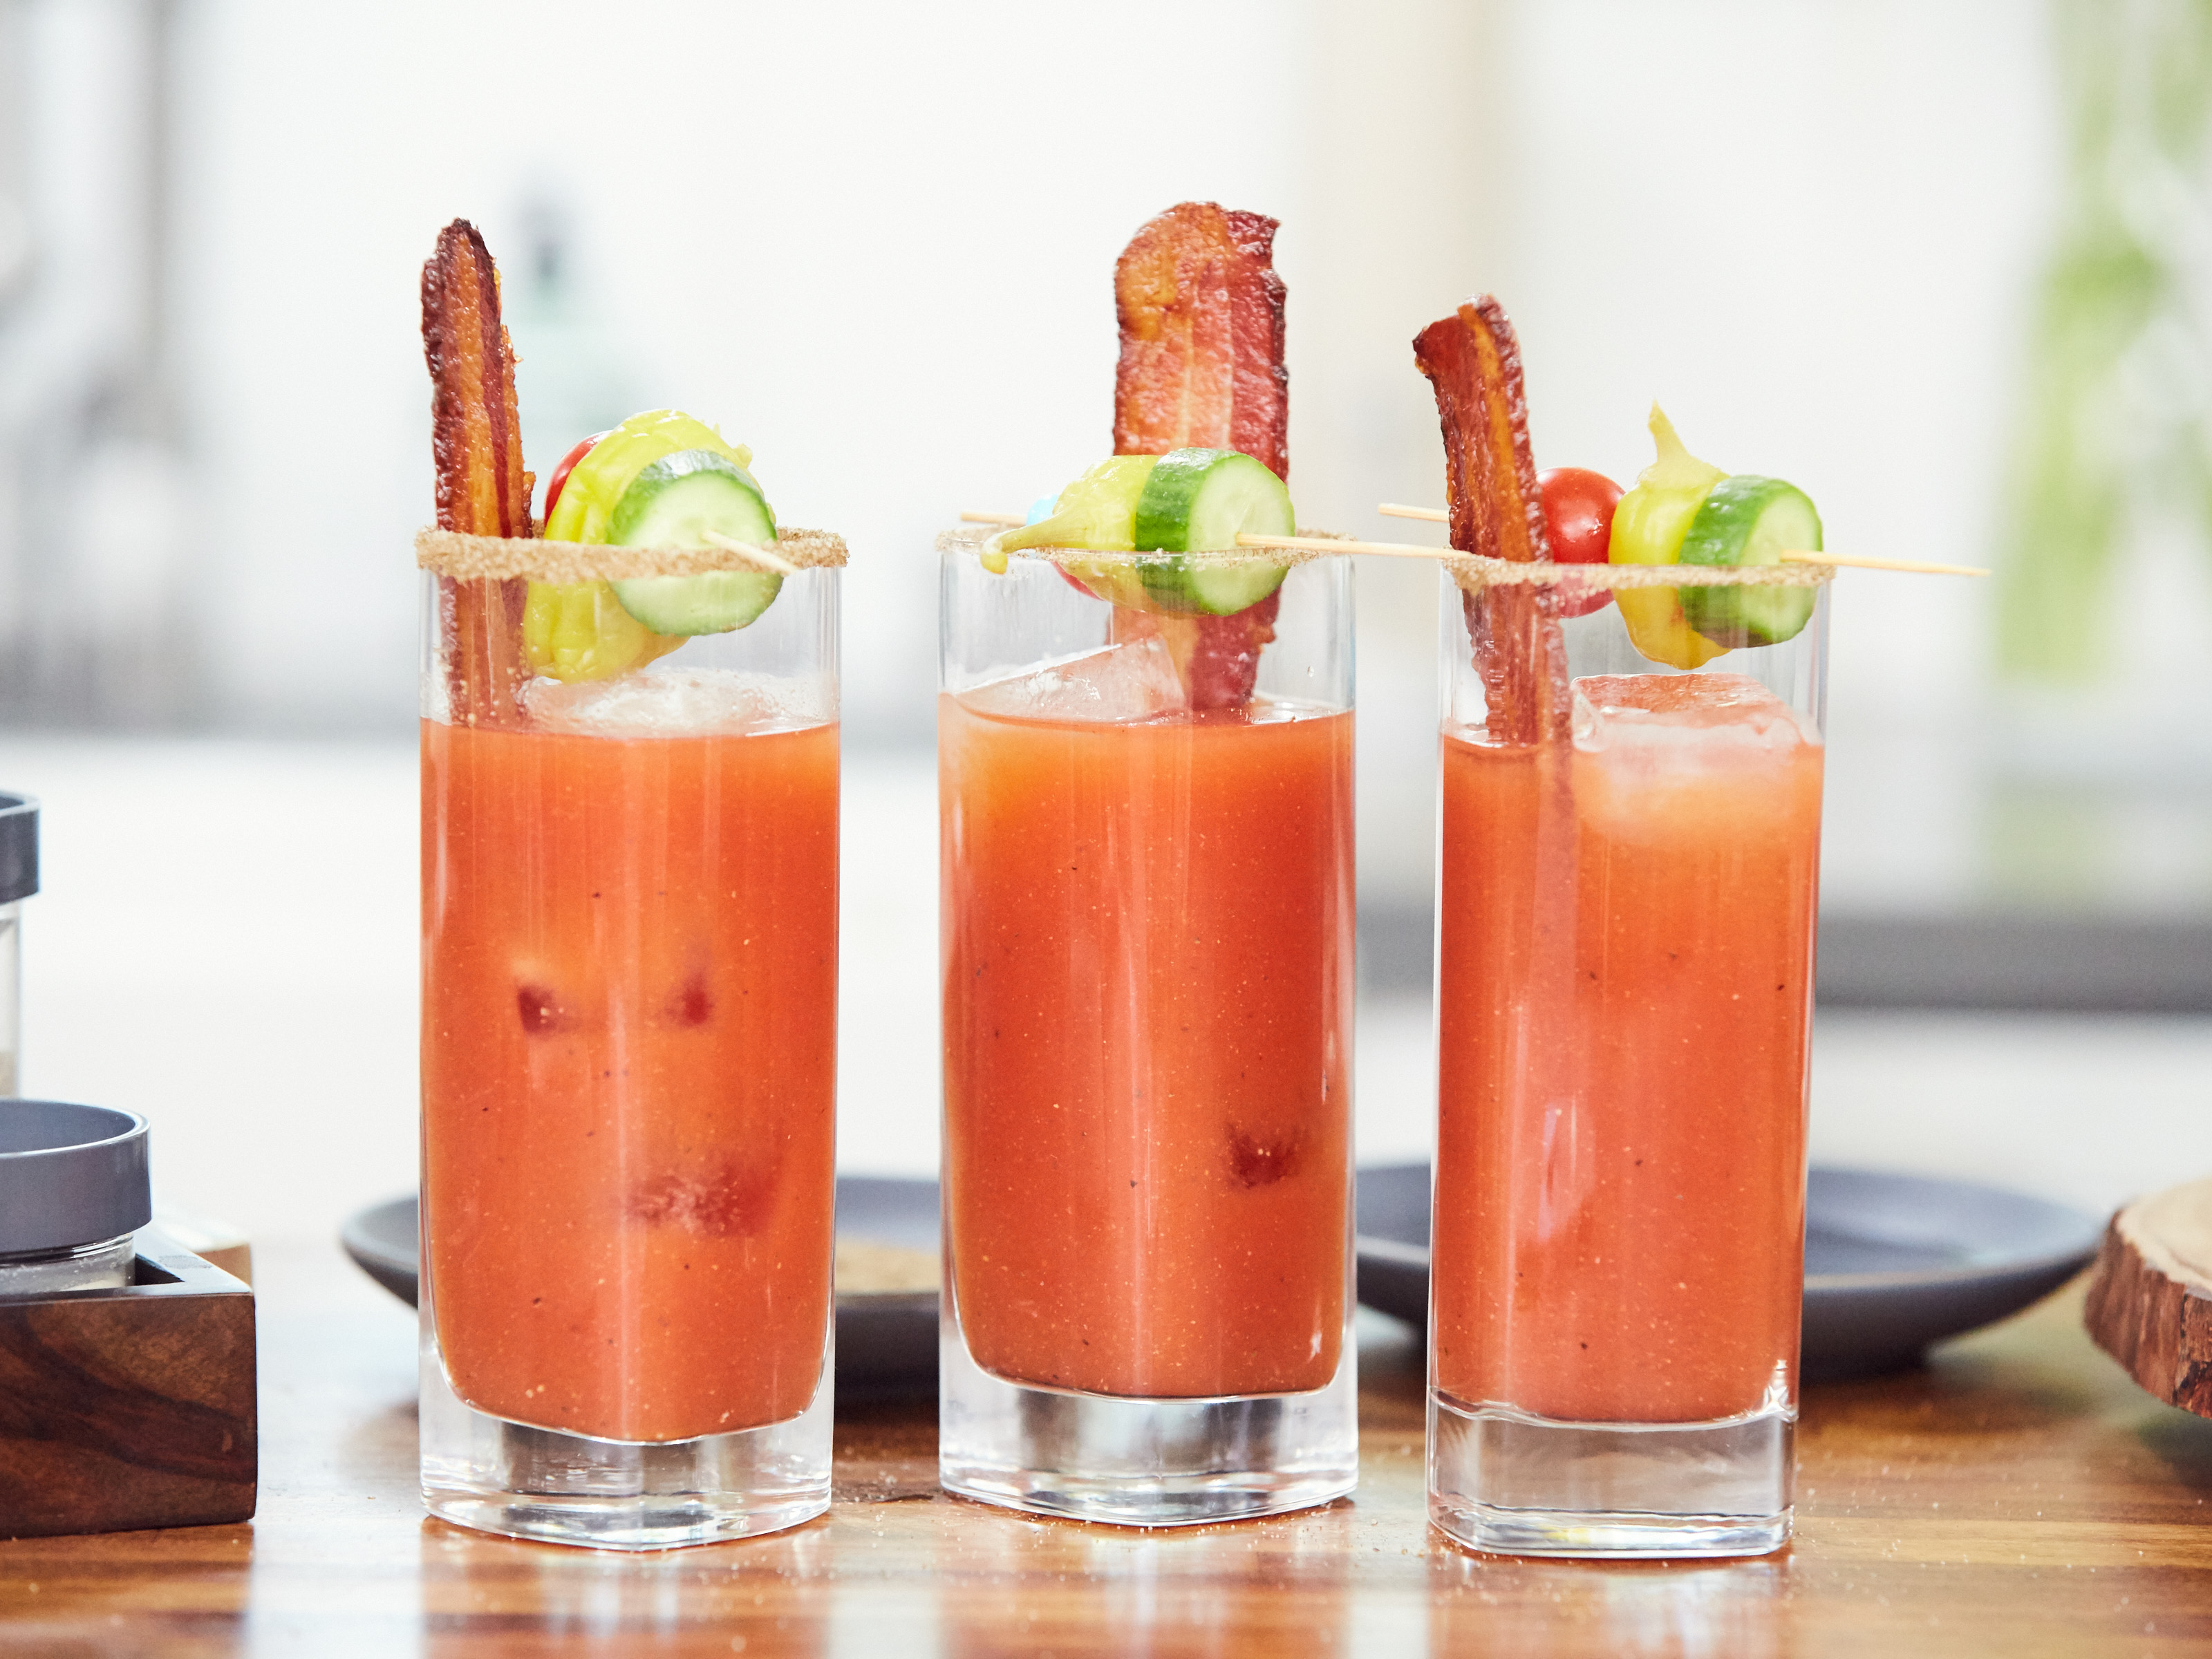 https://www.cookingchanneltv.com/content/dam/images/food/fullset/2017/1/18/3/CCTIF308H_Tiffanis-Spicy-Bloody-Mary-with-Maple-Bacon_s4x3.jpg